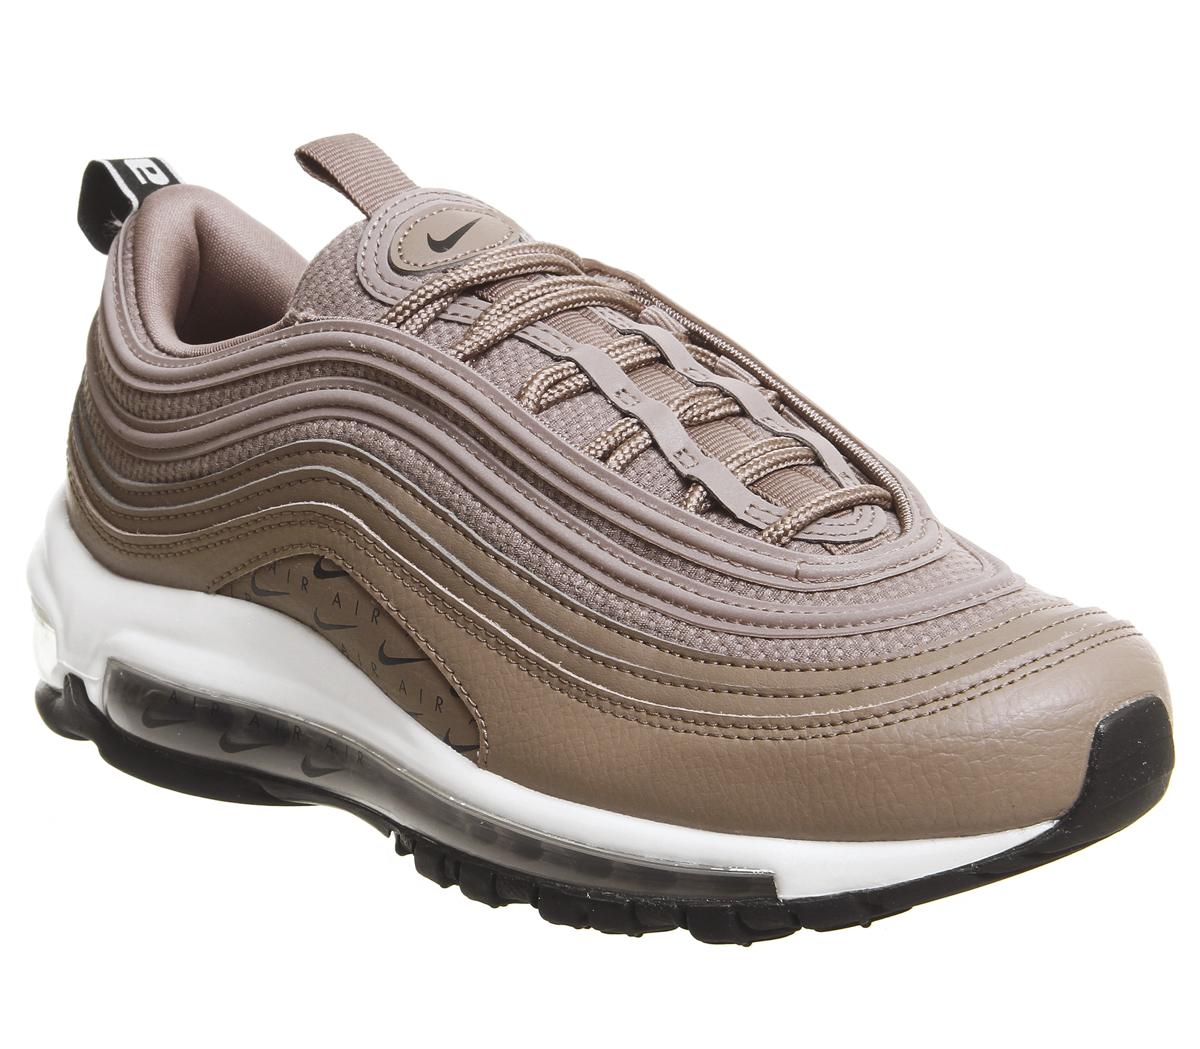 Nike Air Max 97 Trainers Desert Dust Pink - Hers trainers